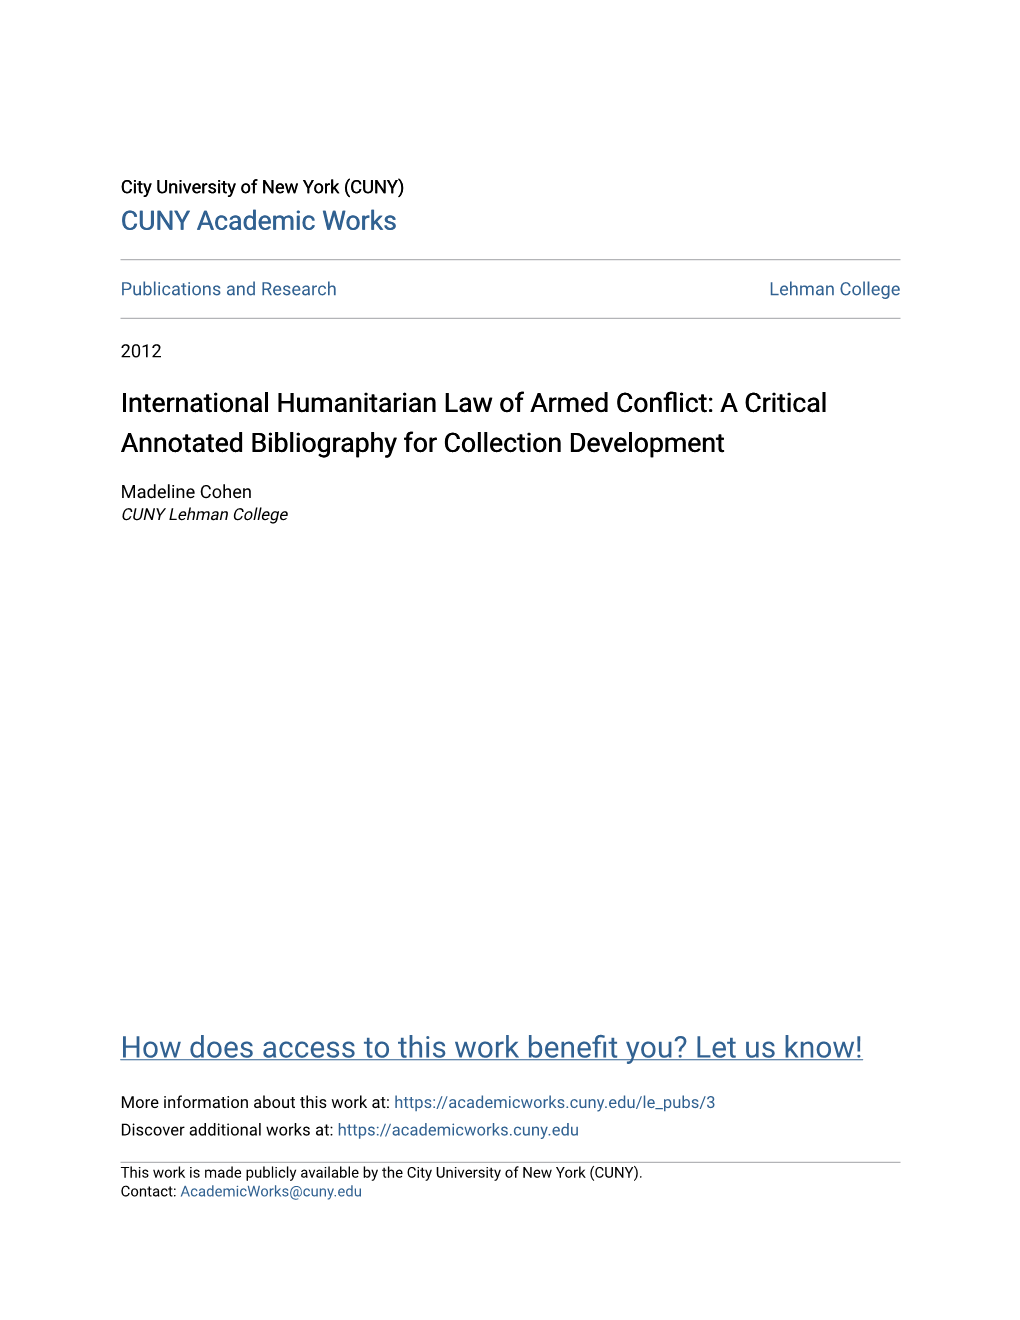 International Humanitarian Law of Armed Conflict: a Critical Annotated Bibliography for Collection Development